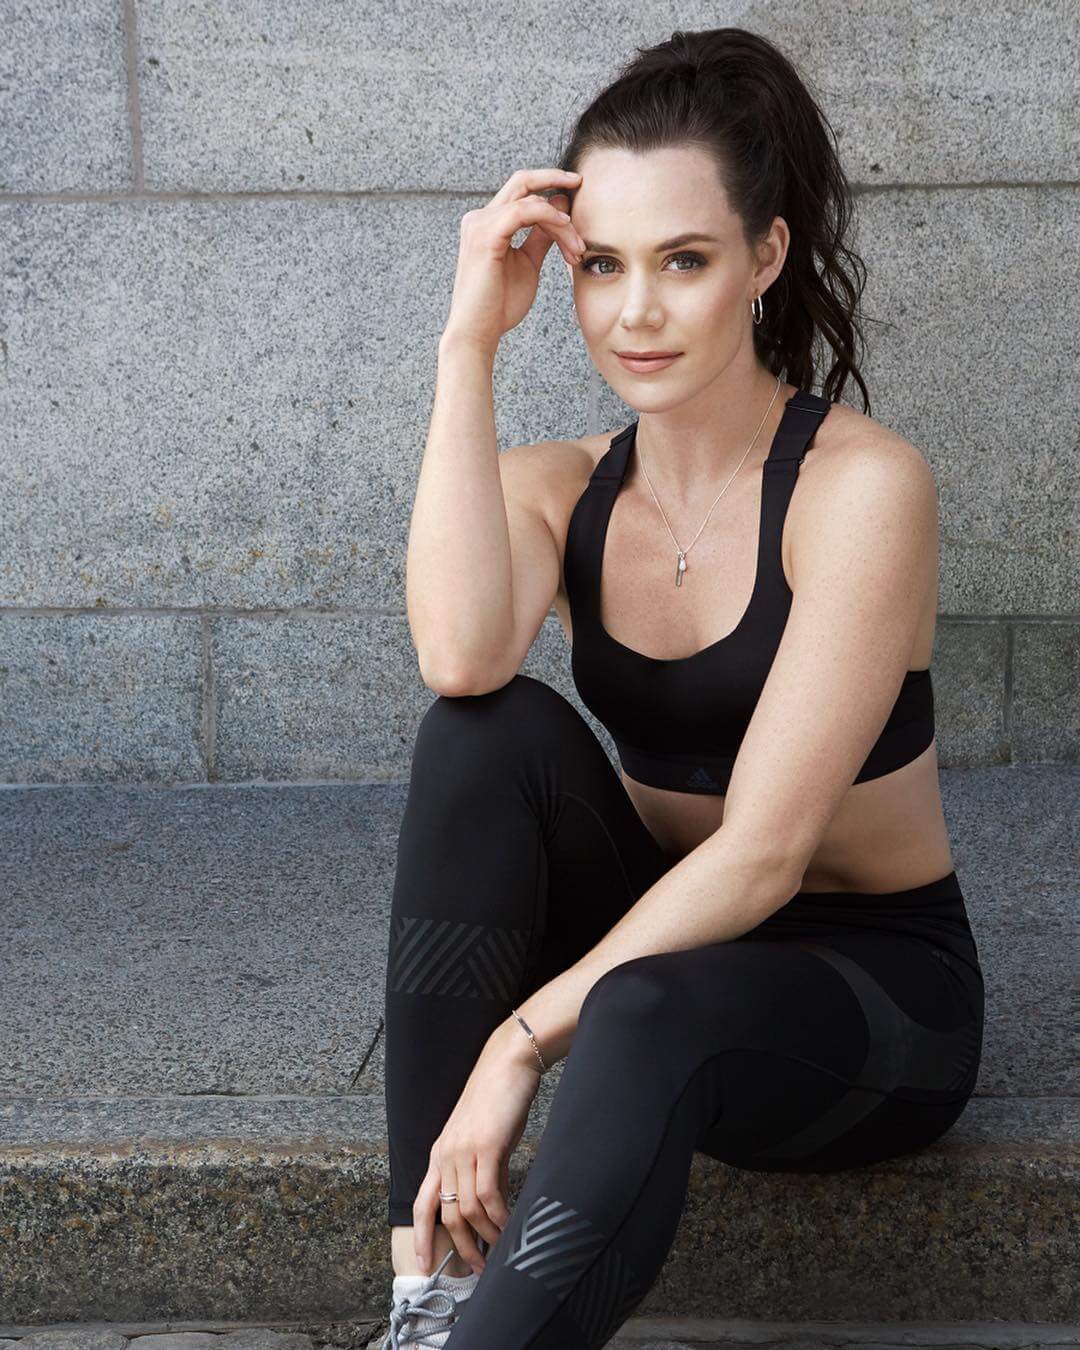 49 Hot Pictures Of Tessa Virtue Which Are A Work Of Art | Best Of Comic Books